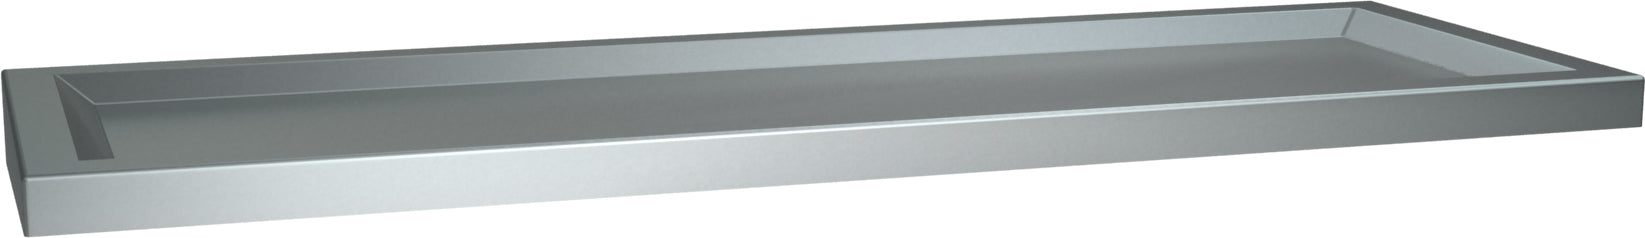 ASI 0690-24 Shelf With Raised Edges, Surface Mounted, 24" Stainless Steel